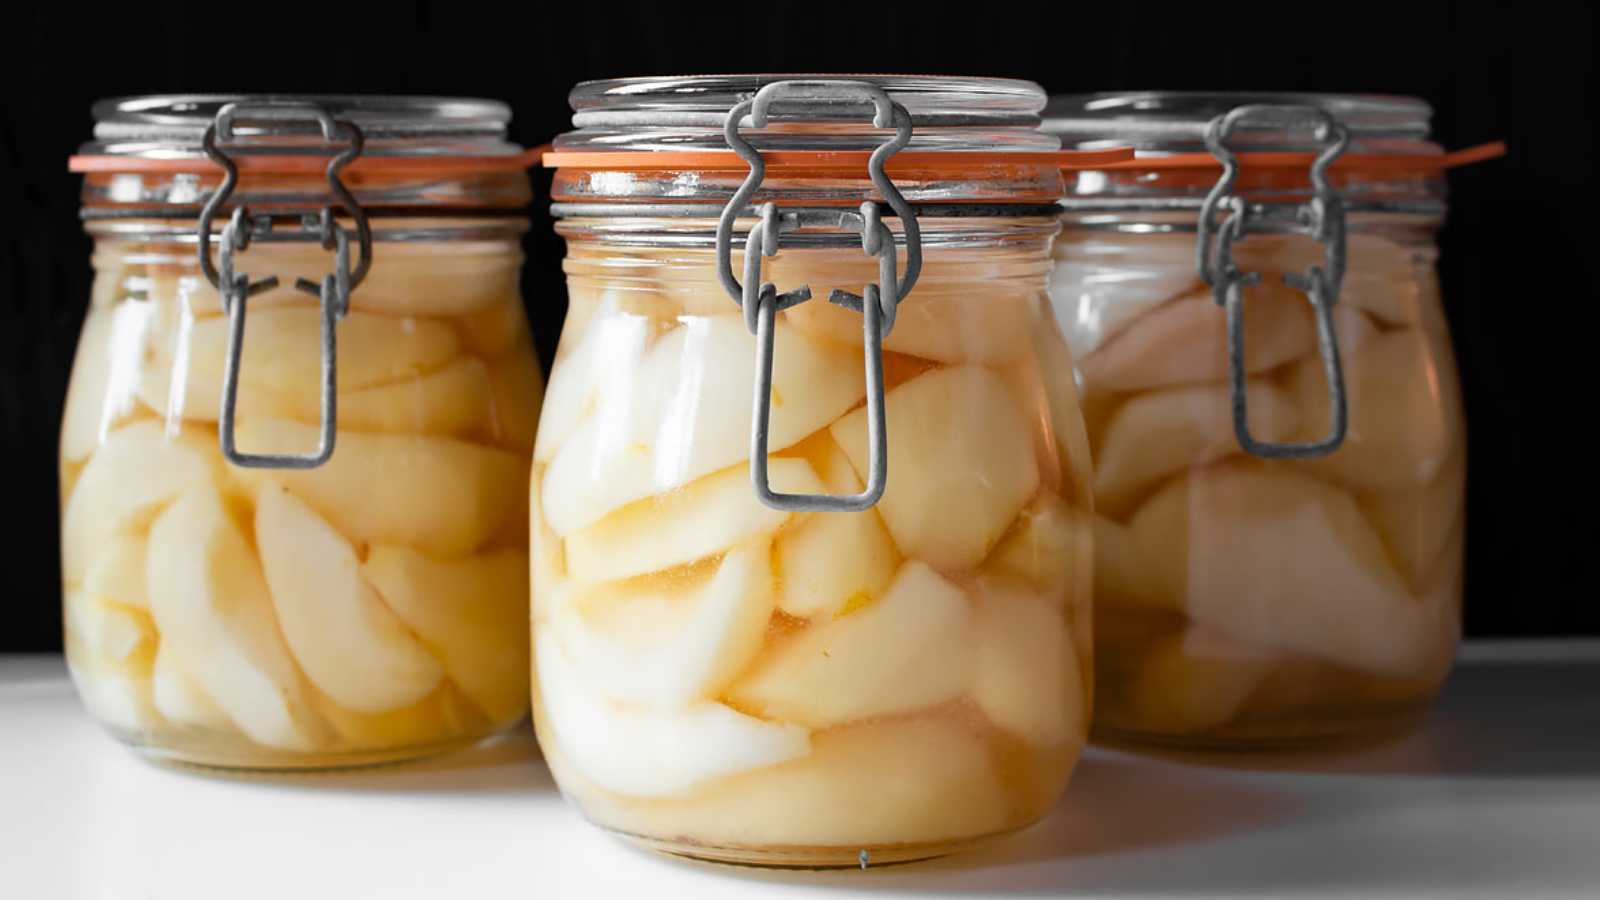 Three jars of pears in syrup.